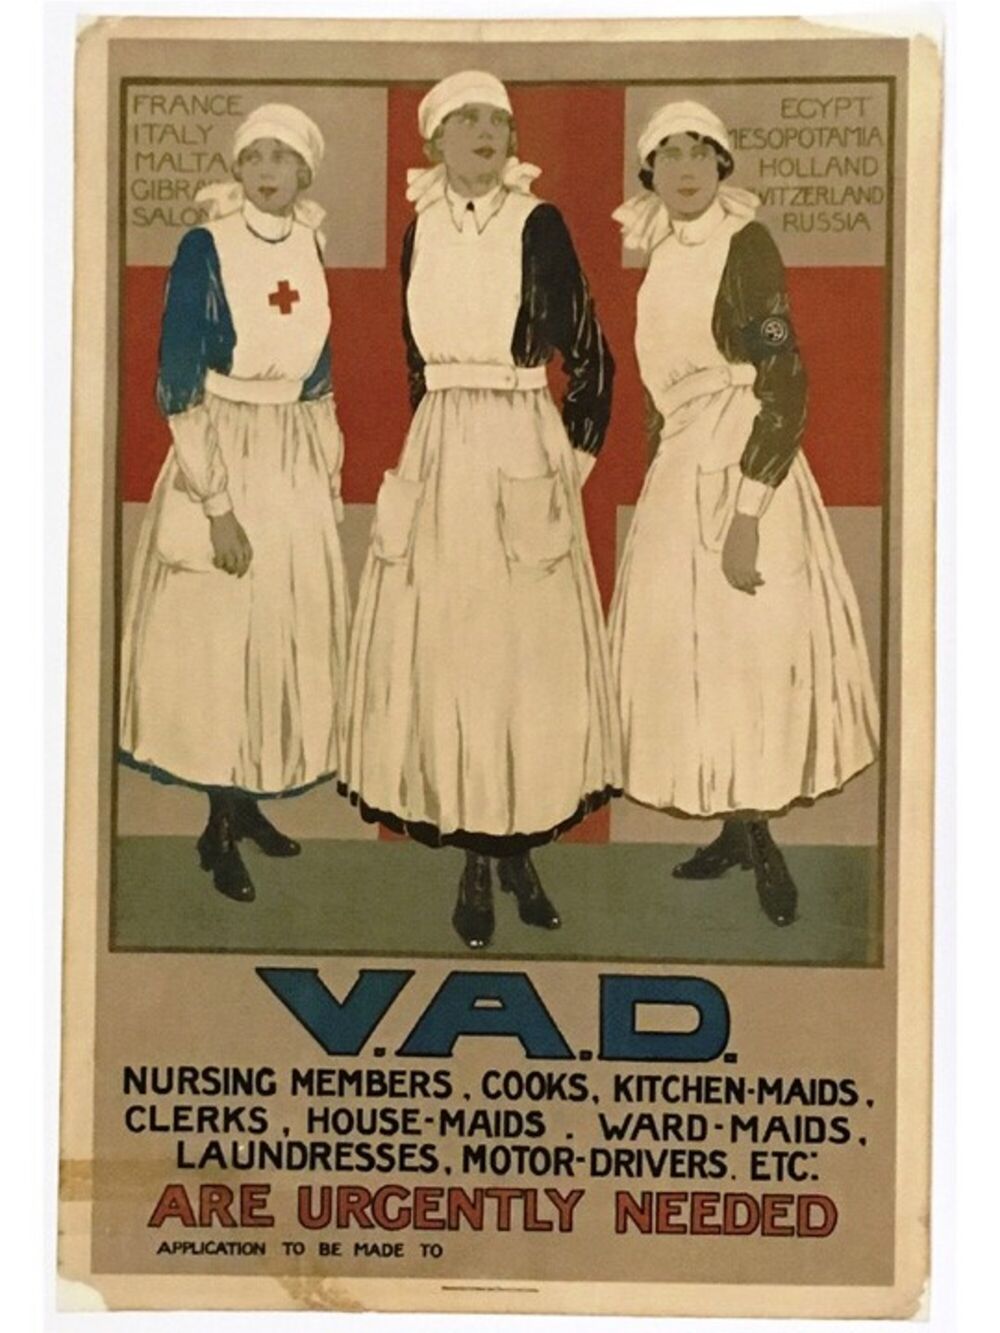 WW1 poster showing 3 nurses. Underneath it says: VAD, nursing members, cooks, kitchen-maids, clerks, house-maids, ward-maids, laundresses, motor-drivers, etc are urgently needed.